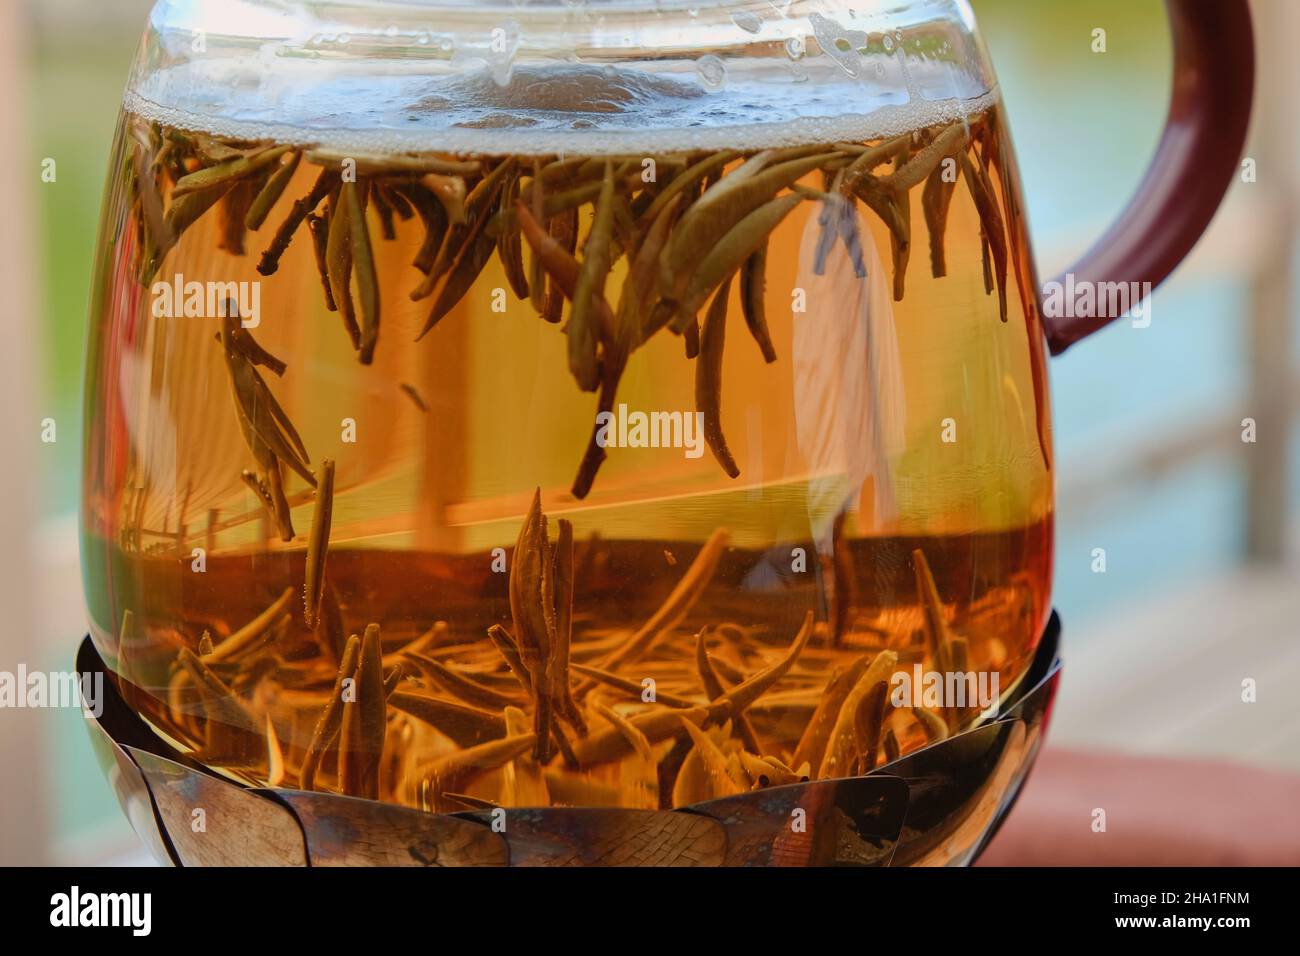 Floating brewing green tea leaves close up inside transparent glass kettle on natural background during tea ceremony Stock Photo